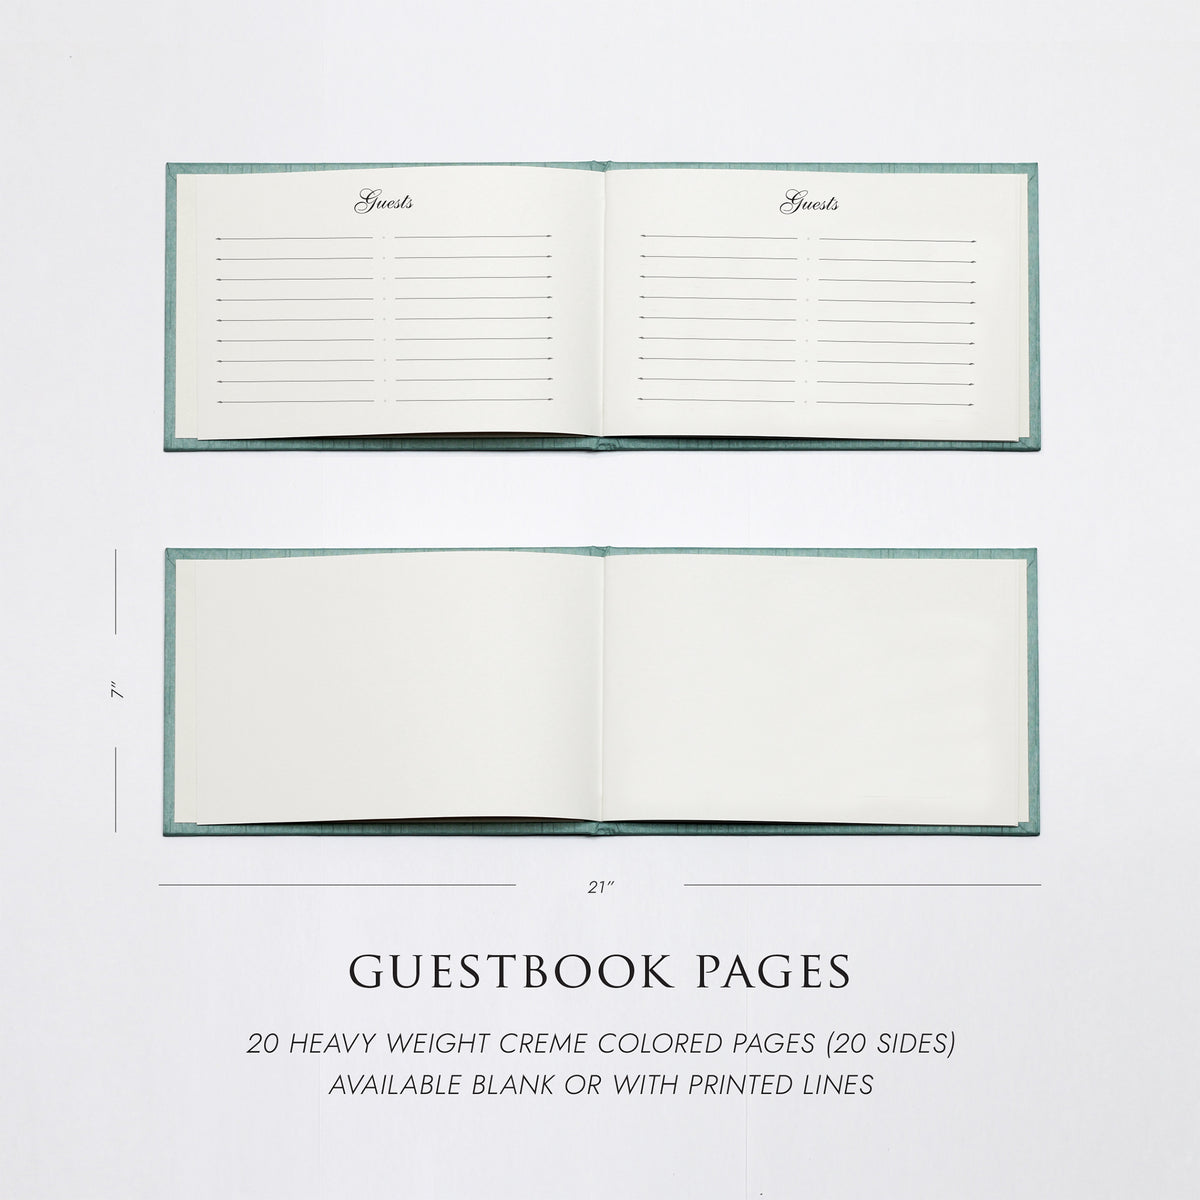 Guestbook Embossed with “Guests” | Cover: Champagne Silk | Available Personalized